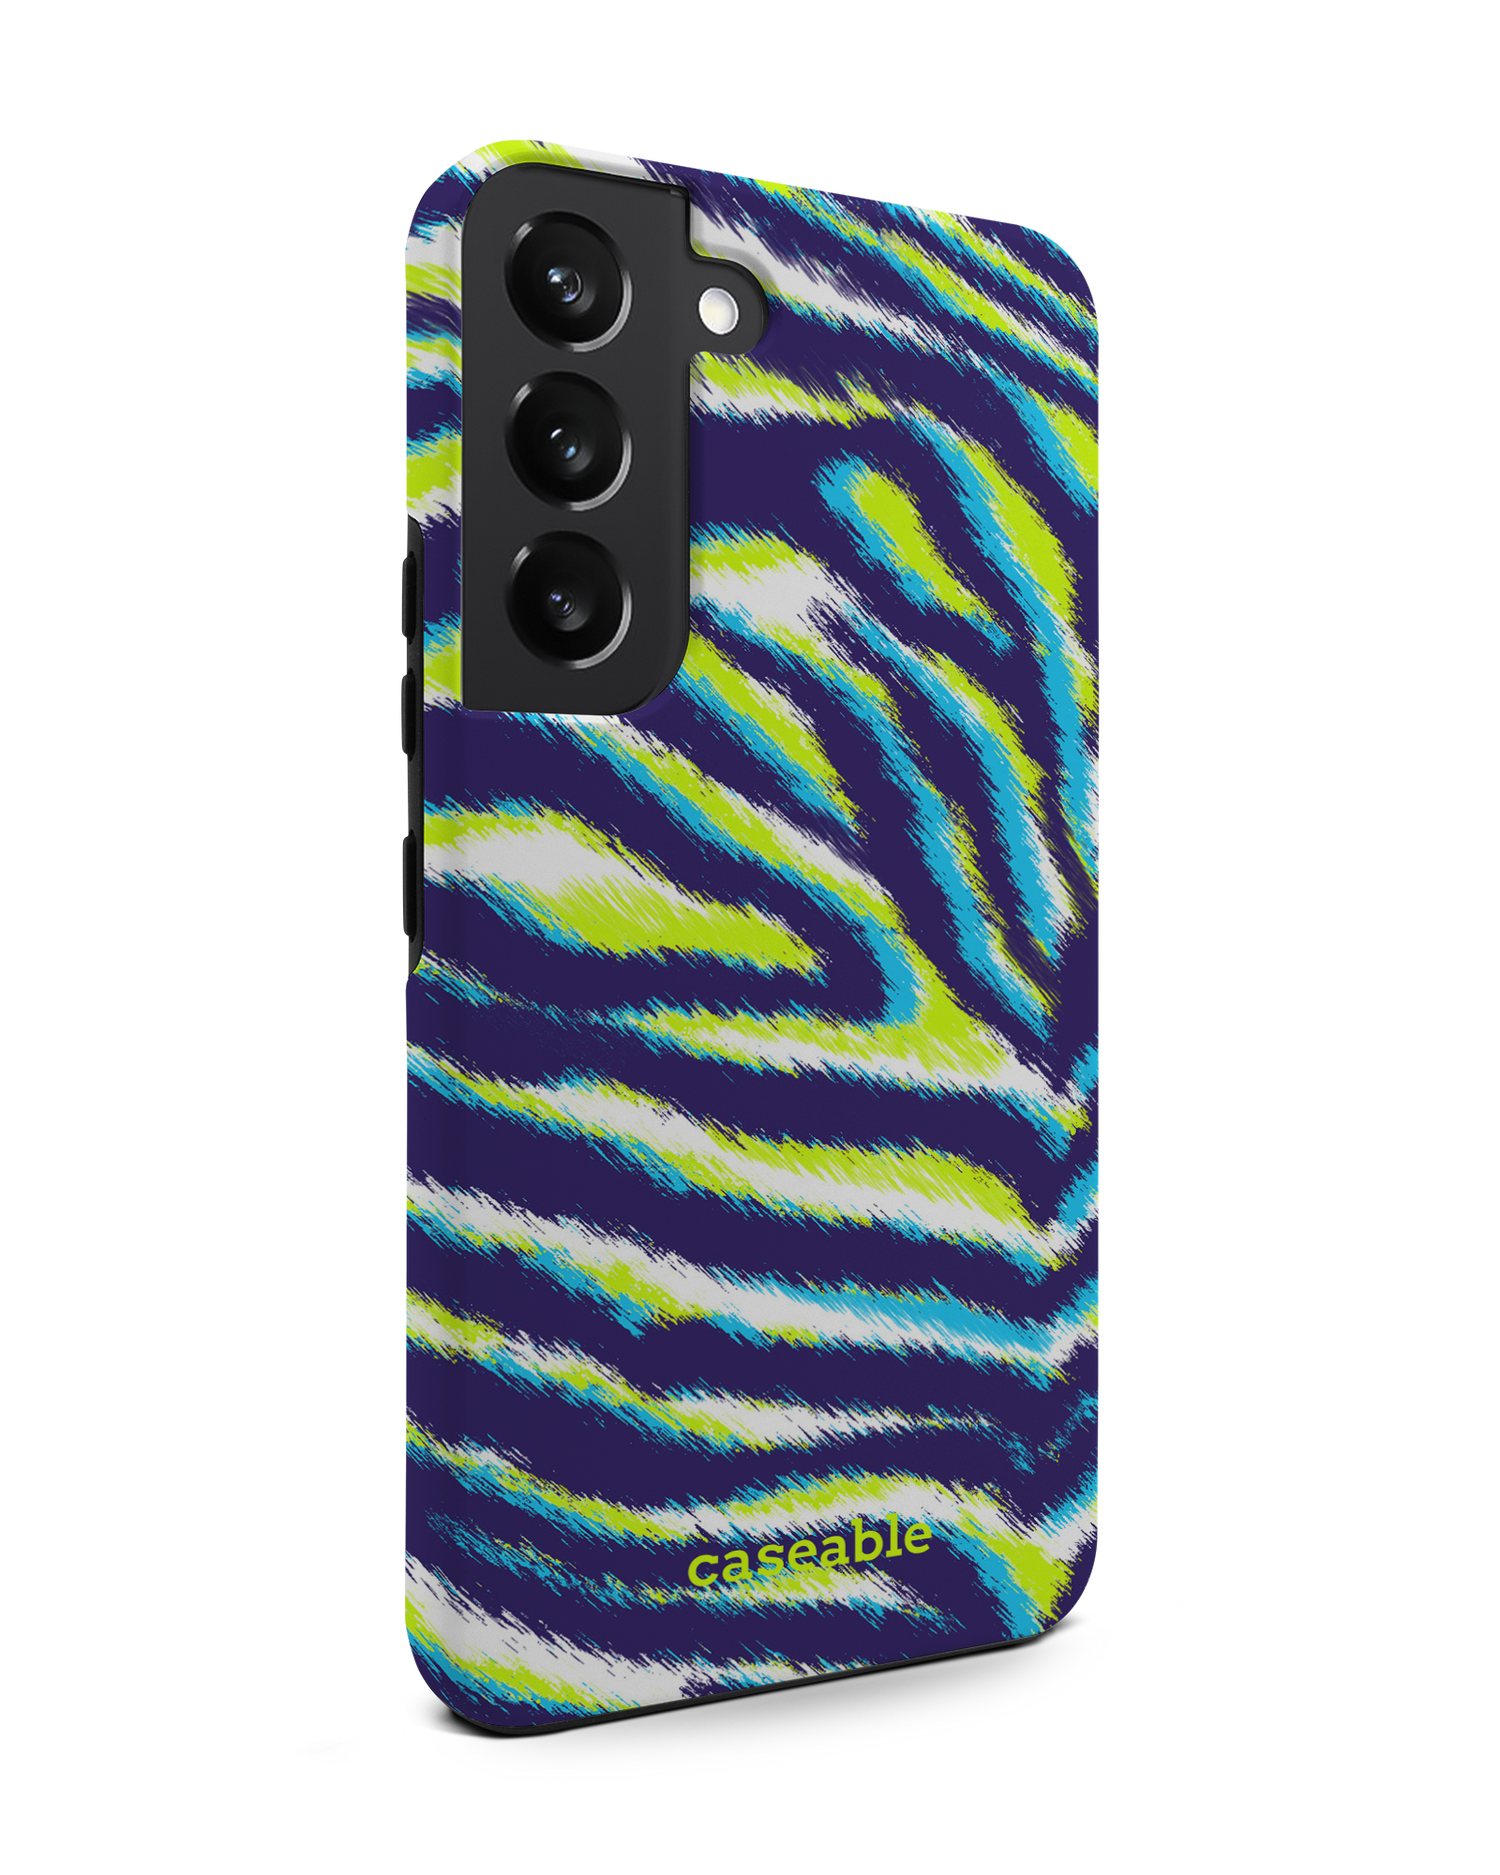 Neon Zebra Premium Phone Case Samsung Galaxy S22 5G: View from the left side